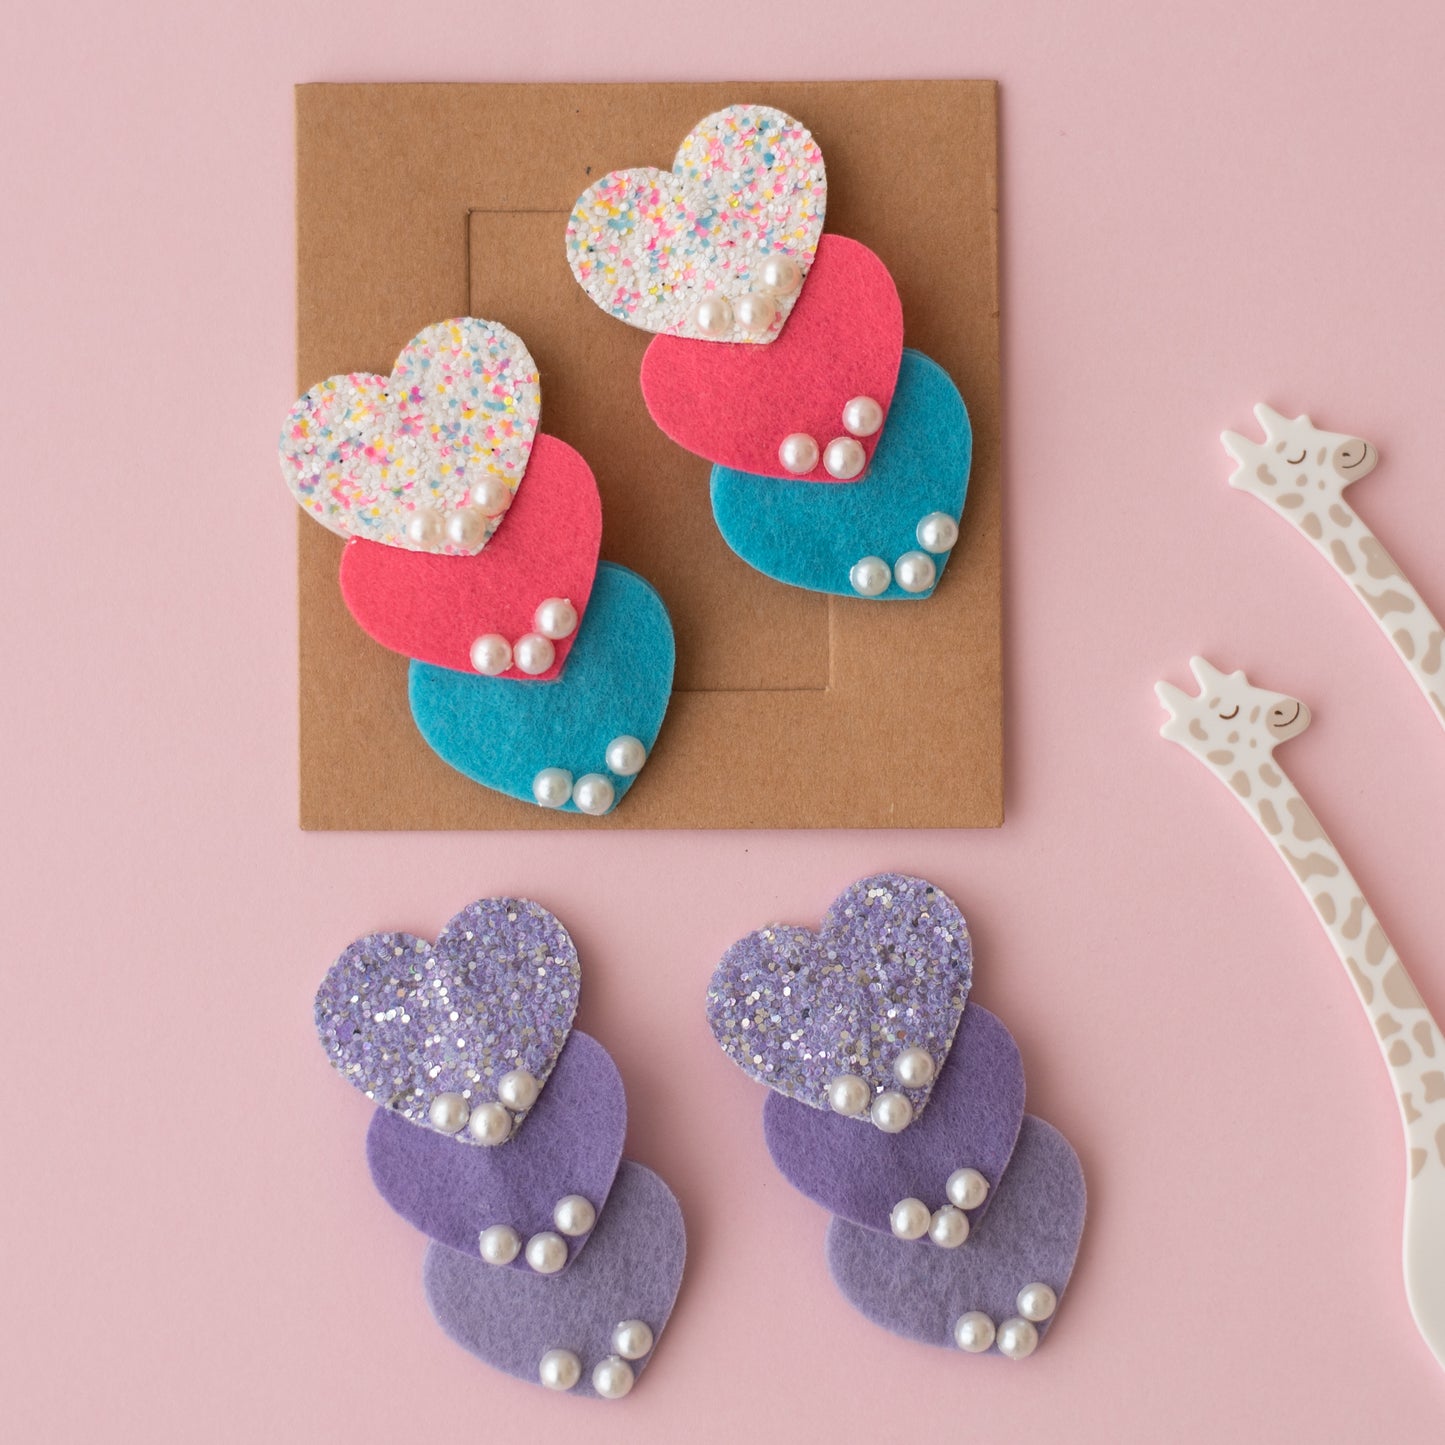 Combo : Set of 2 cute shimmer heart tic-tac pins embellished with pearls  - White, Pink, Blue, Purple